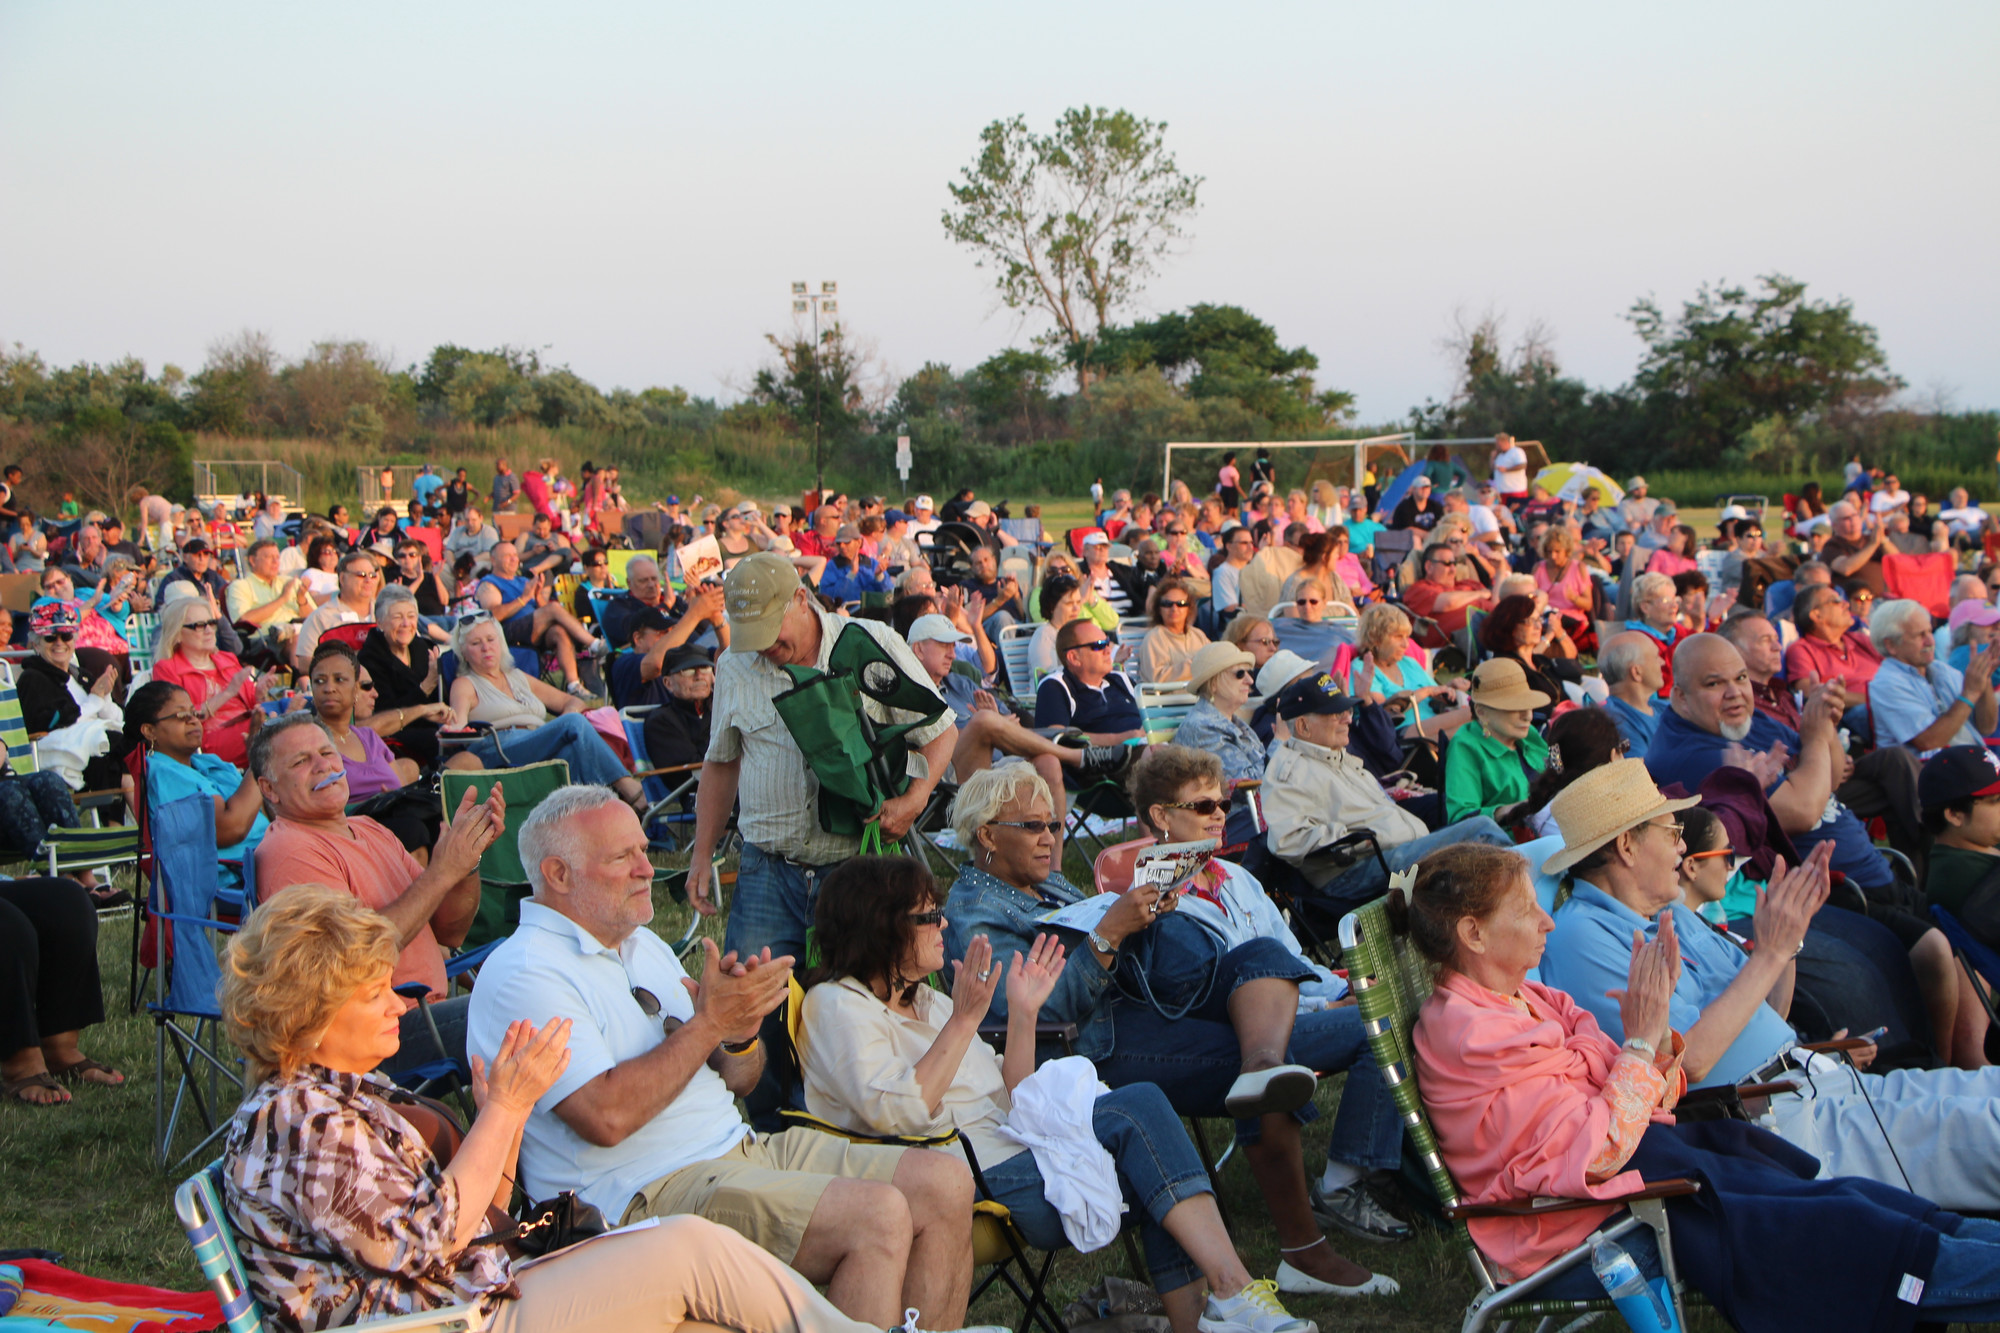 Baldwin Park was packed with people last Saturday, who enjoyed the Johnny Cash Tribute Band ‘Walking the Line’ during Baldwin Day 2014.